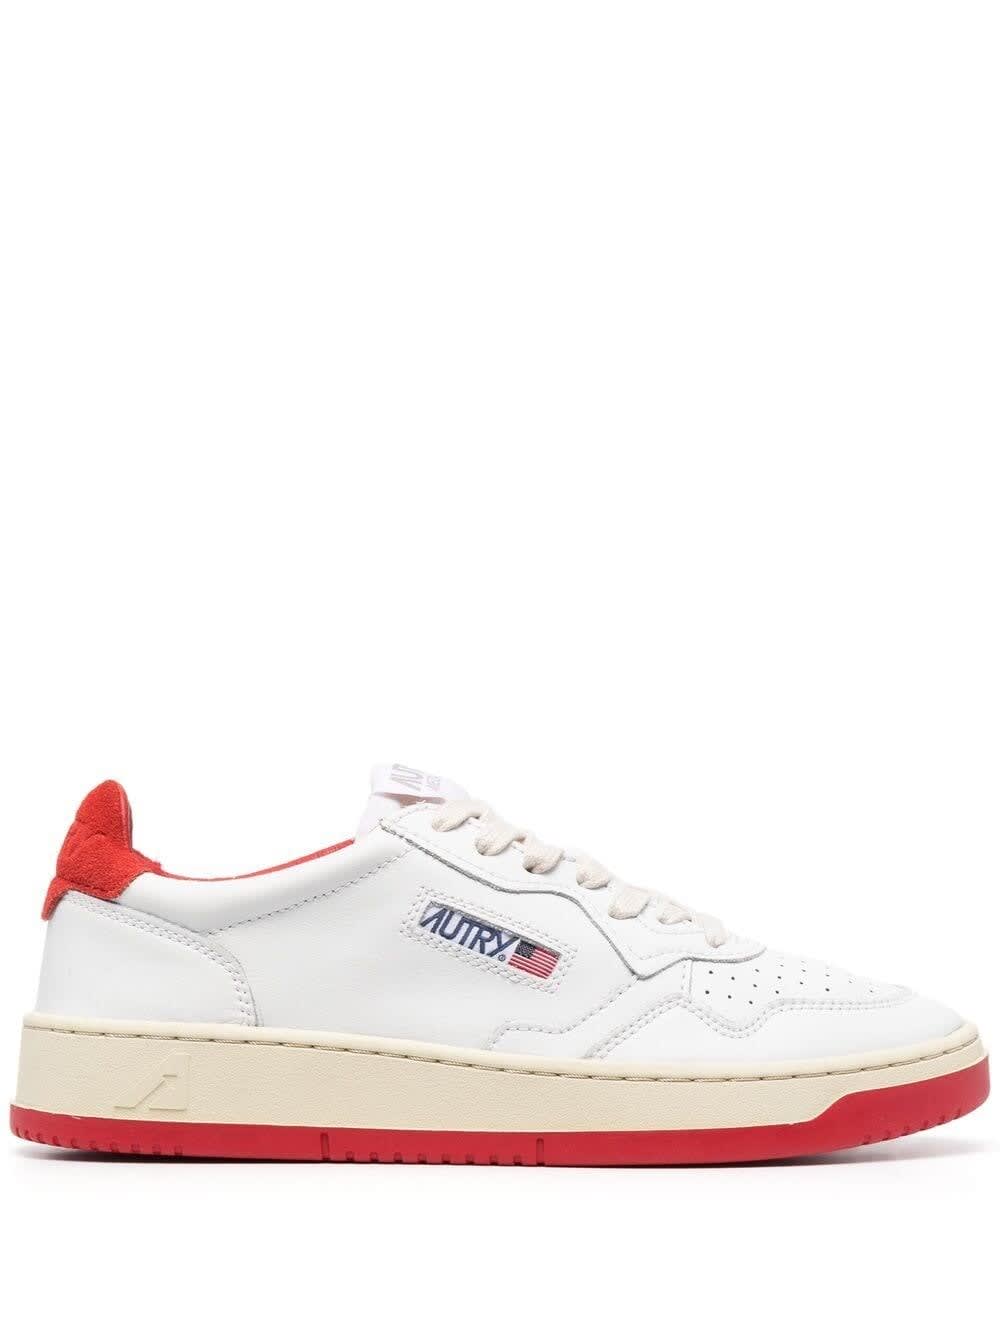 Autry 01 Low Sneakers In White And Red Leather